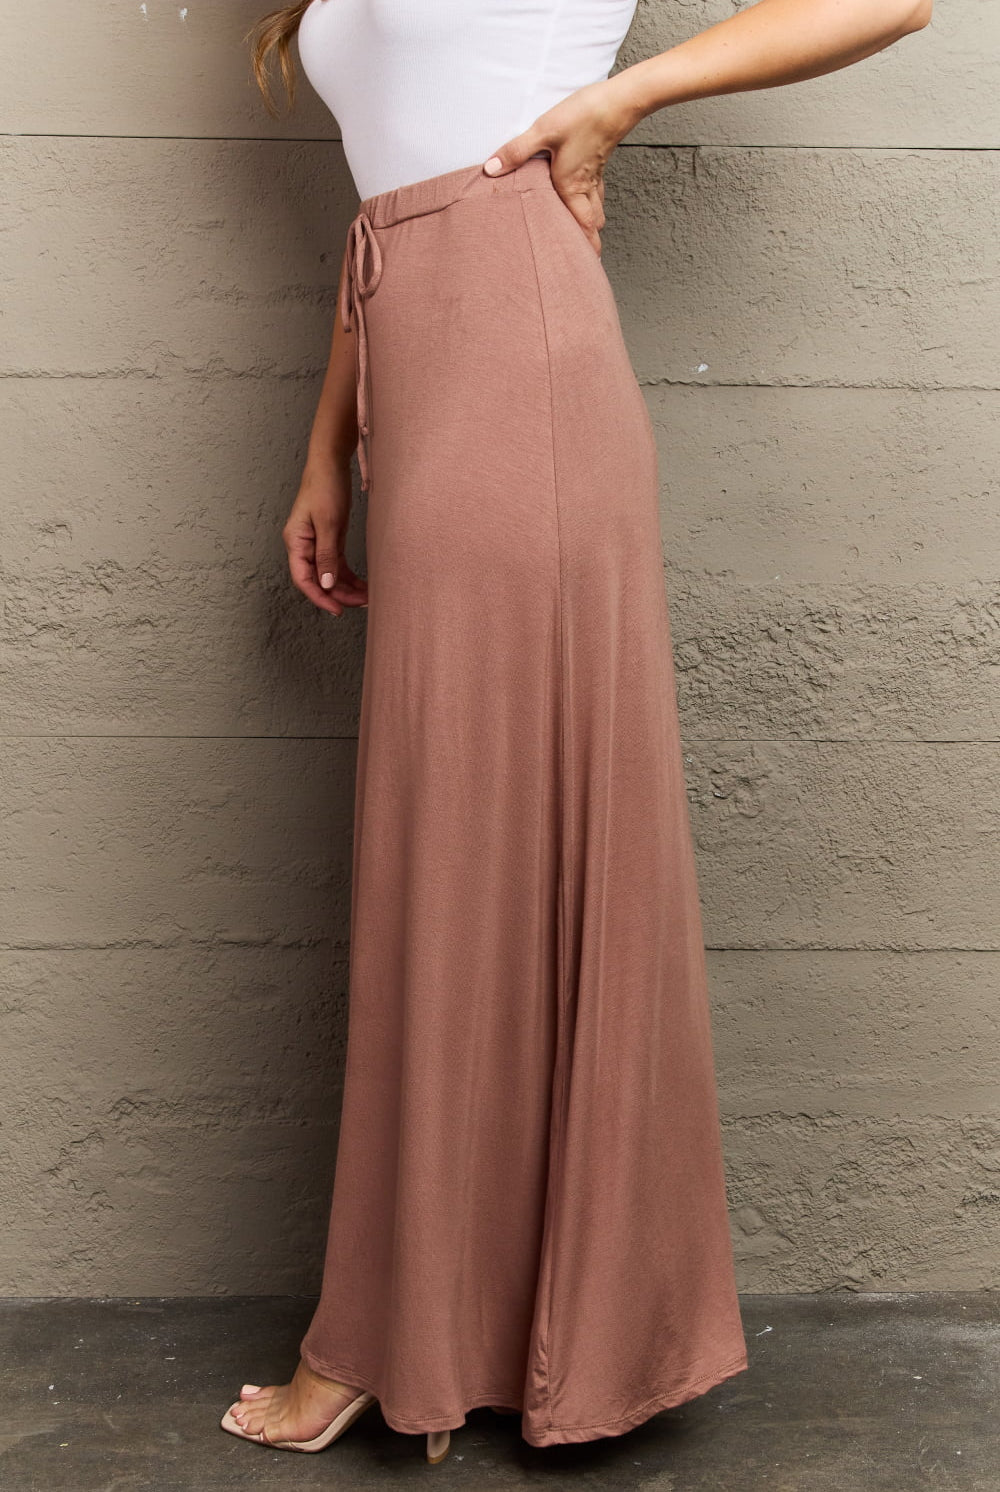 Dim Gray For The Day Full Size Flare Maxi Skirt in Chocolate Maxi Skirt